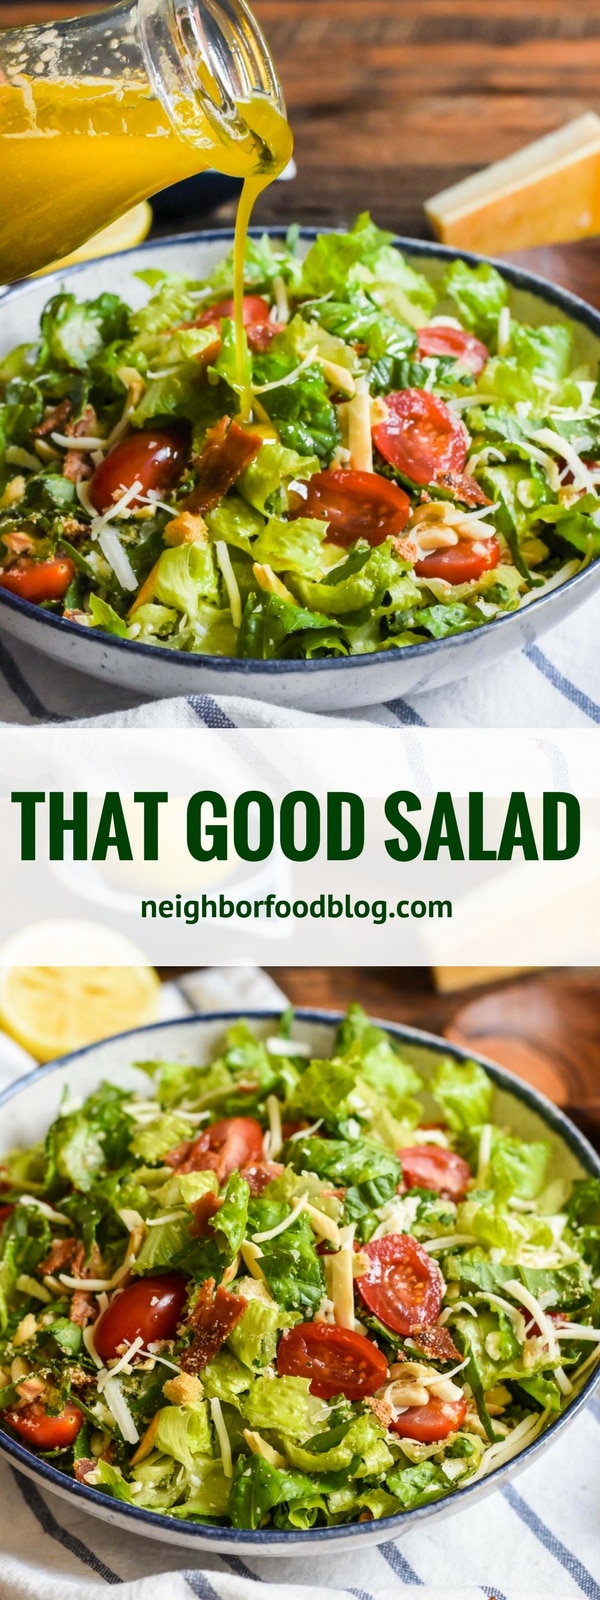 That Good Salad earned its name by being the talk of every potluck and dinner party. With bacon, Parmesan, tomatoes, and a lemon garlic dressing, it's always a hit!